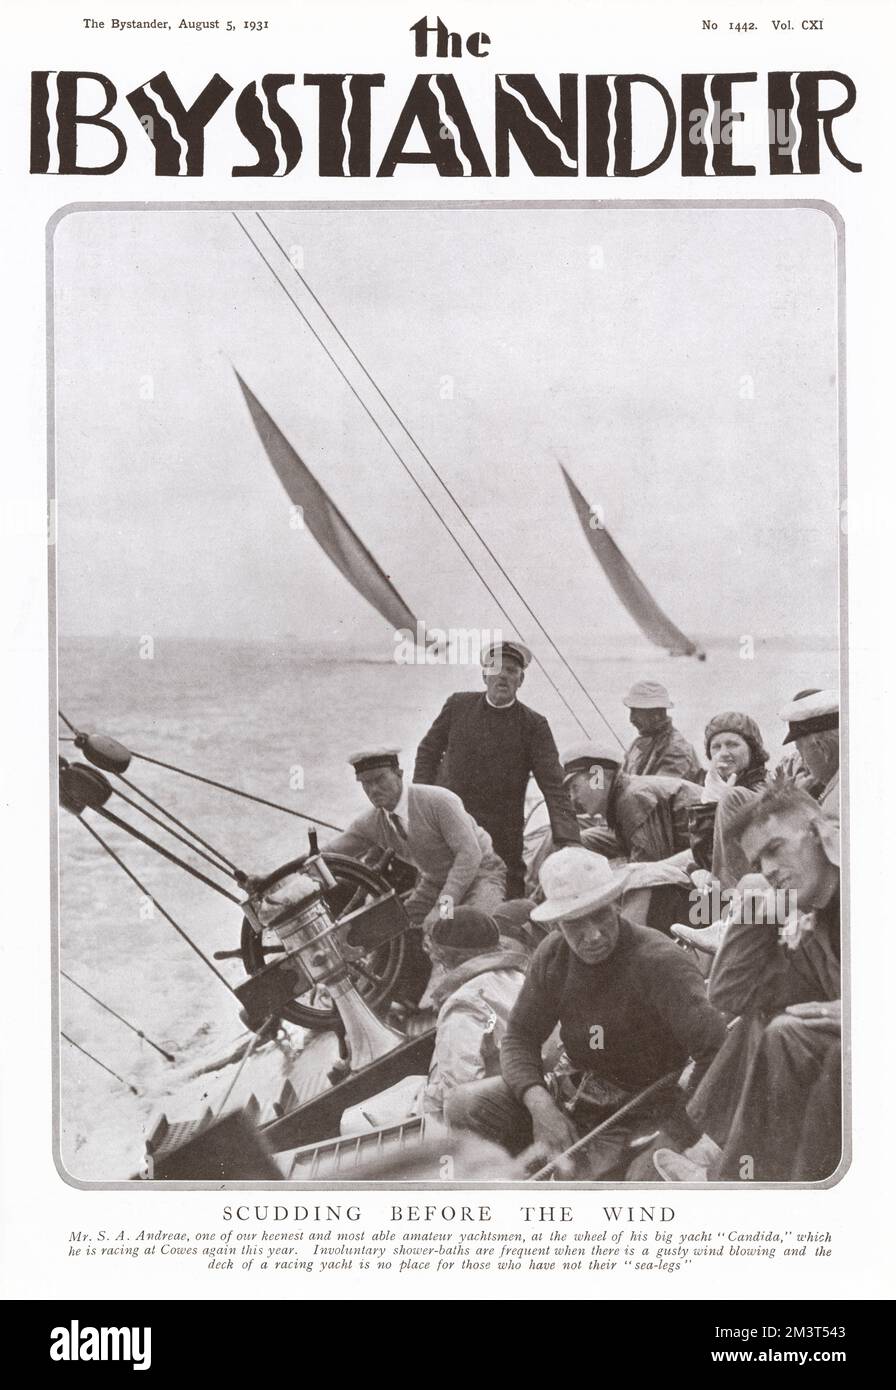 Herman Andreae, New York banker and owner and helmsman of the racing yacht, Candida, seen here with crew on board as the yacht scuds before the wind. Stock Photo